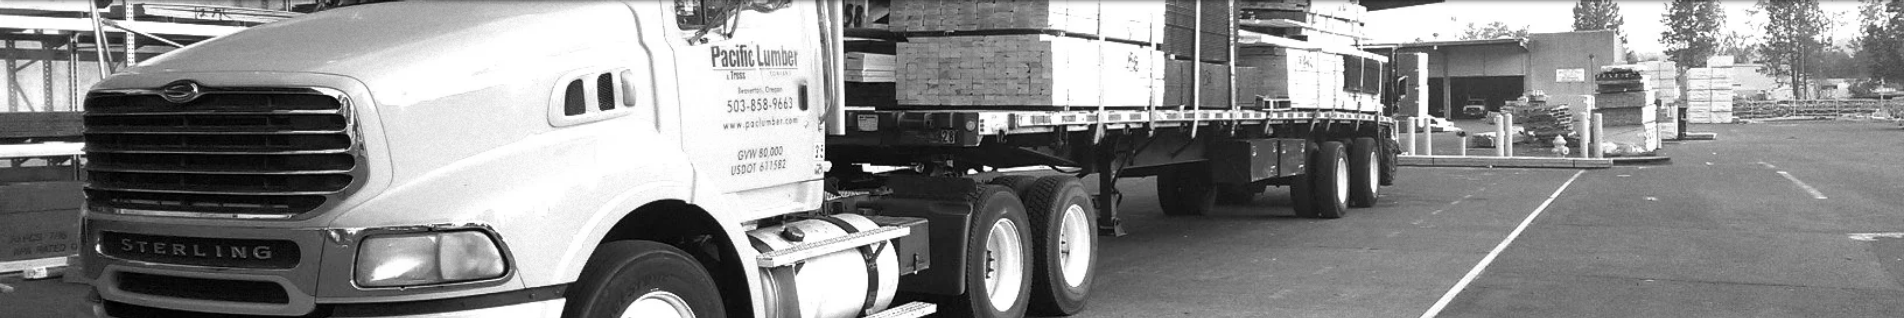 Black and white loaded Pacific Lumber truck